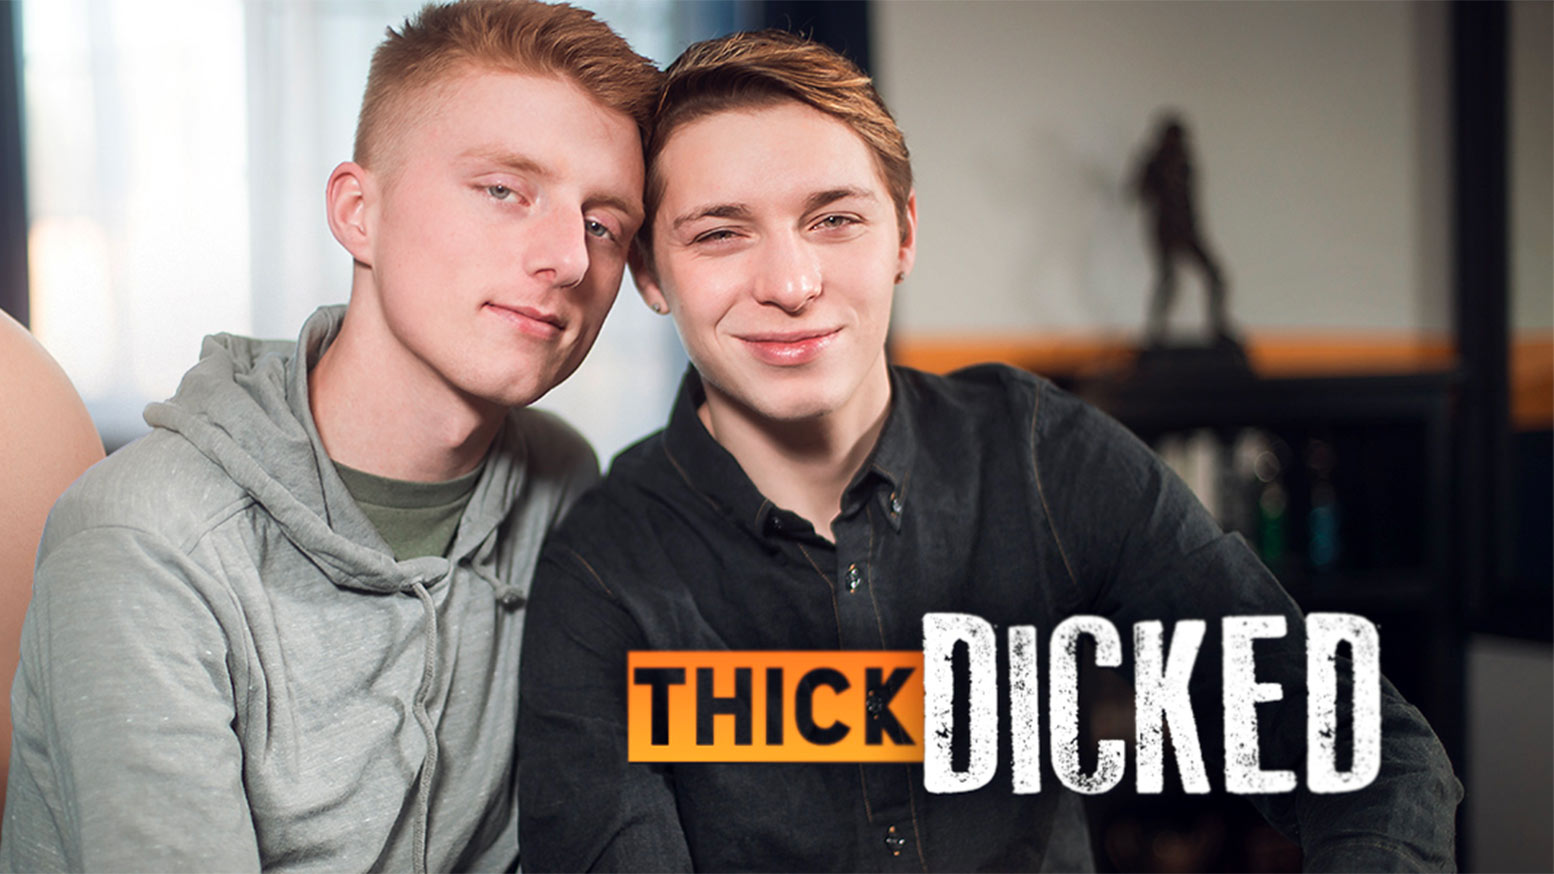 Thick Dicked